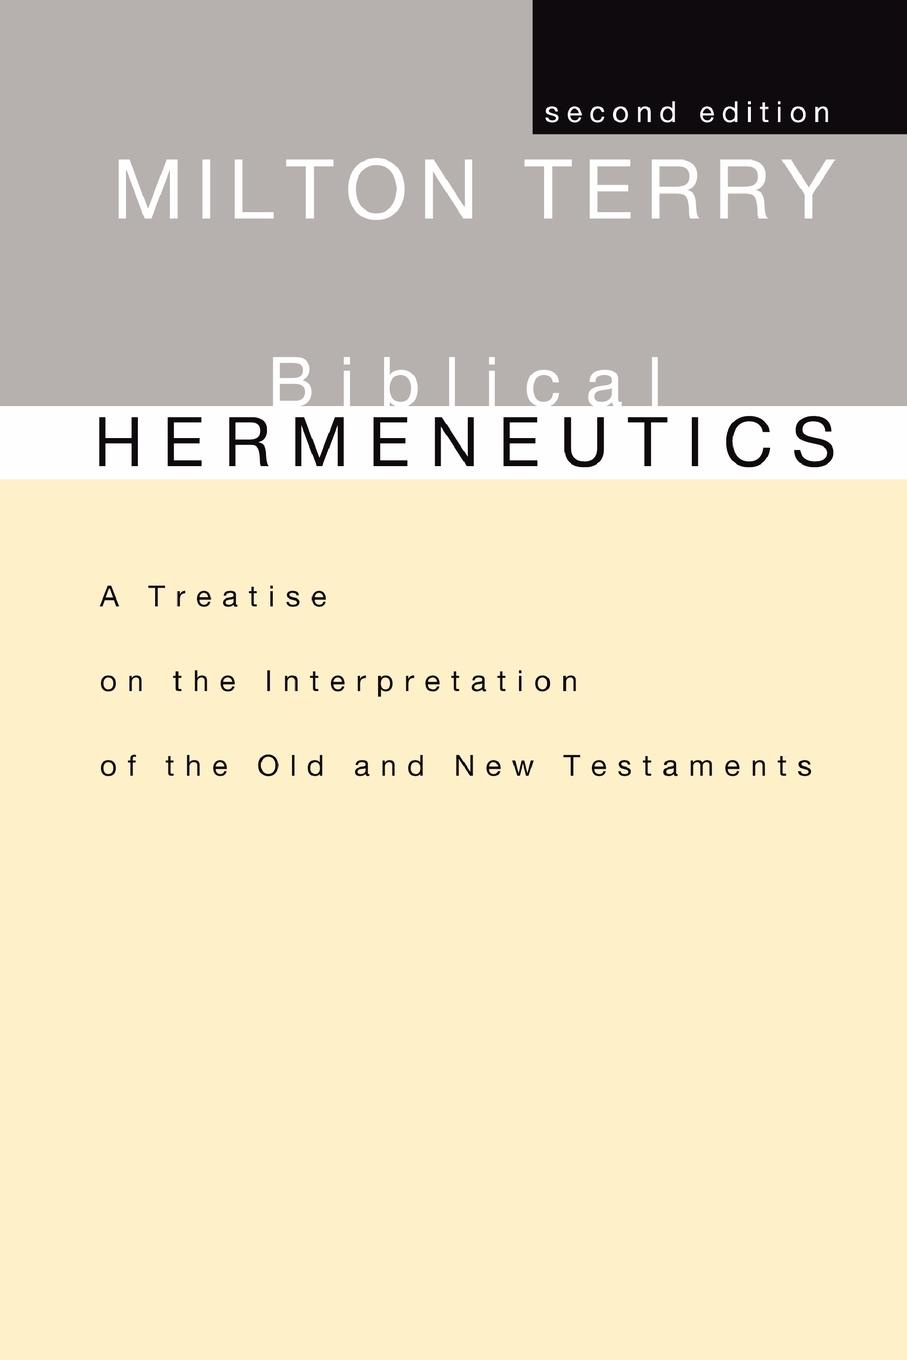 Biblical Hermeneutics. A Treatise on the Interpretation of the Old and New Testaments